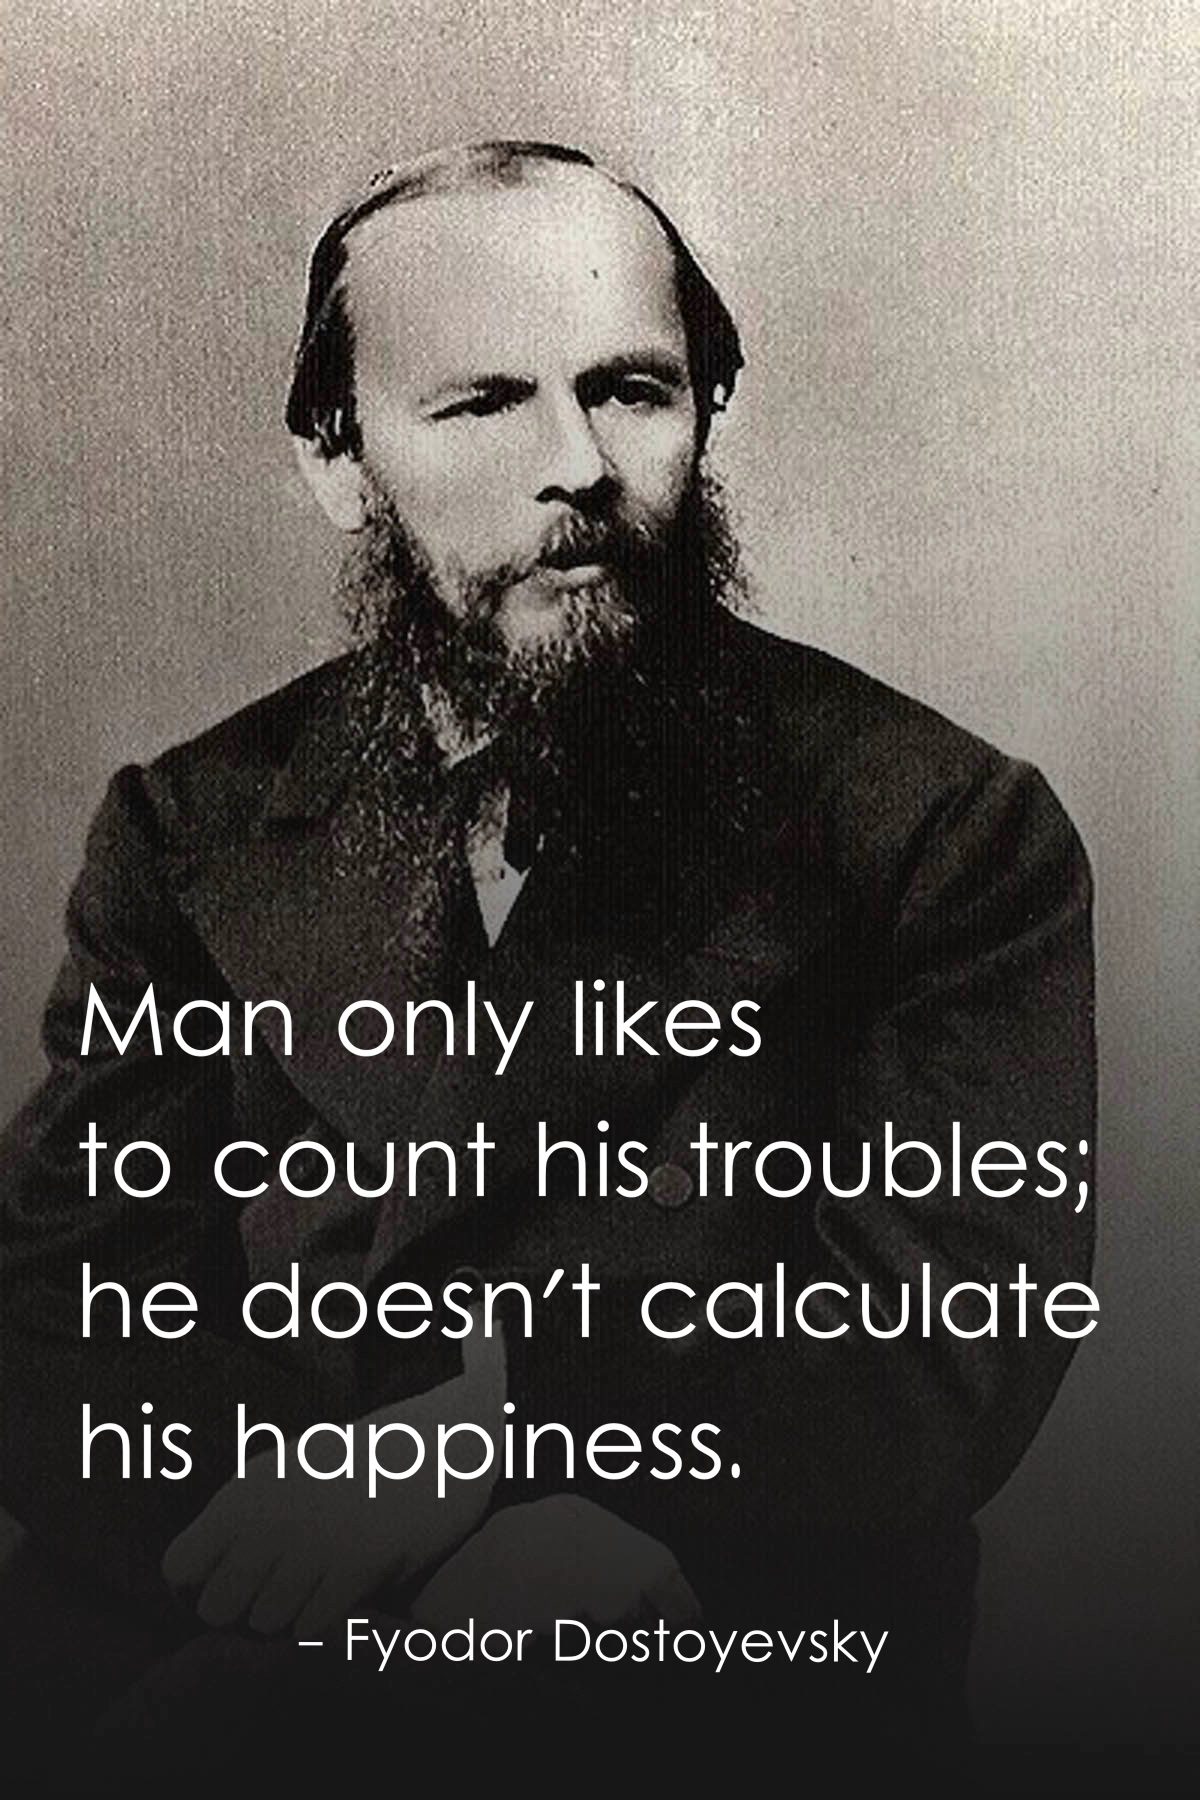 Man only likes to count his troubles; he doesn't calculate his happiness.